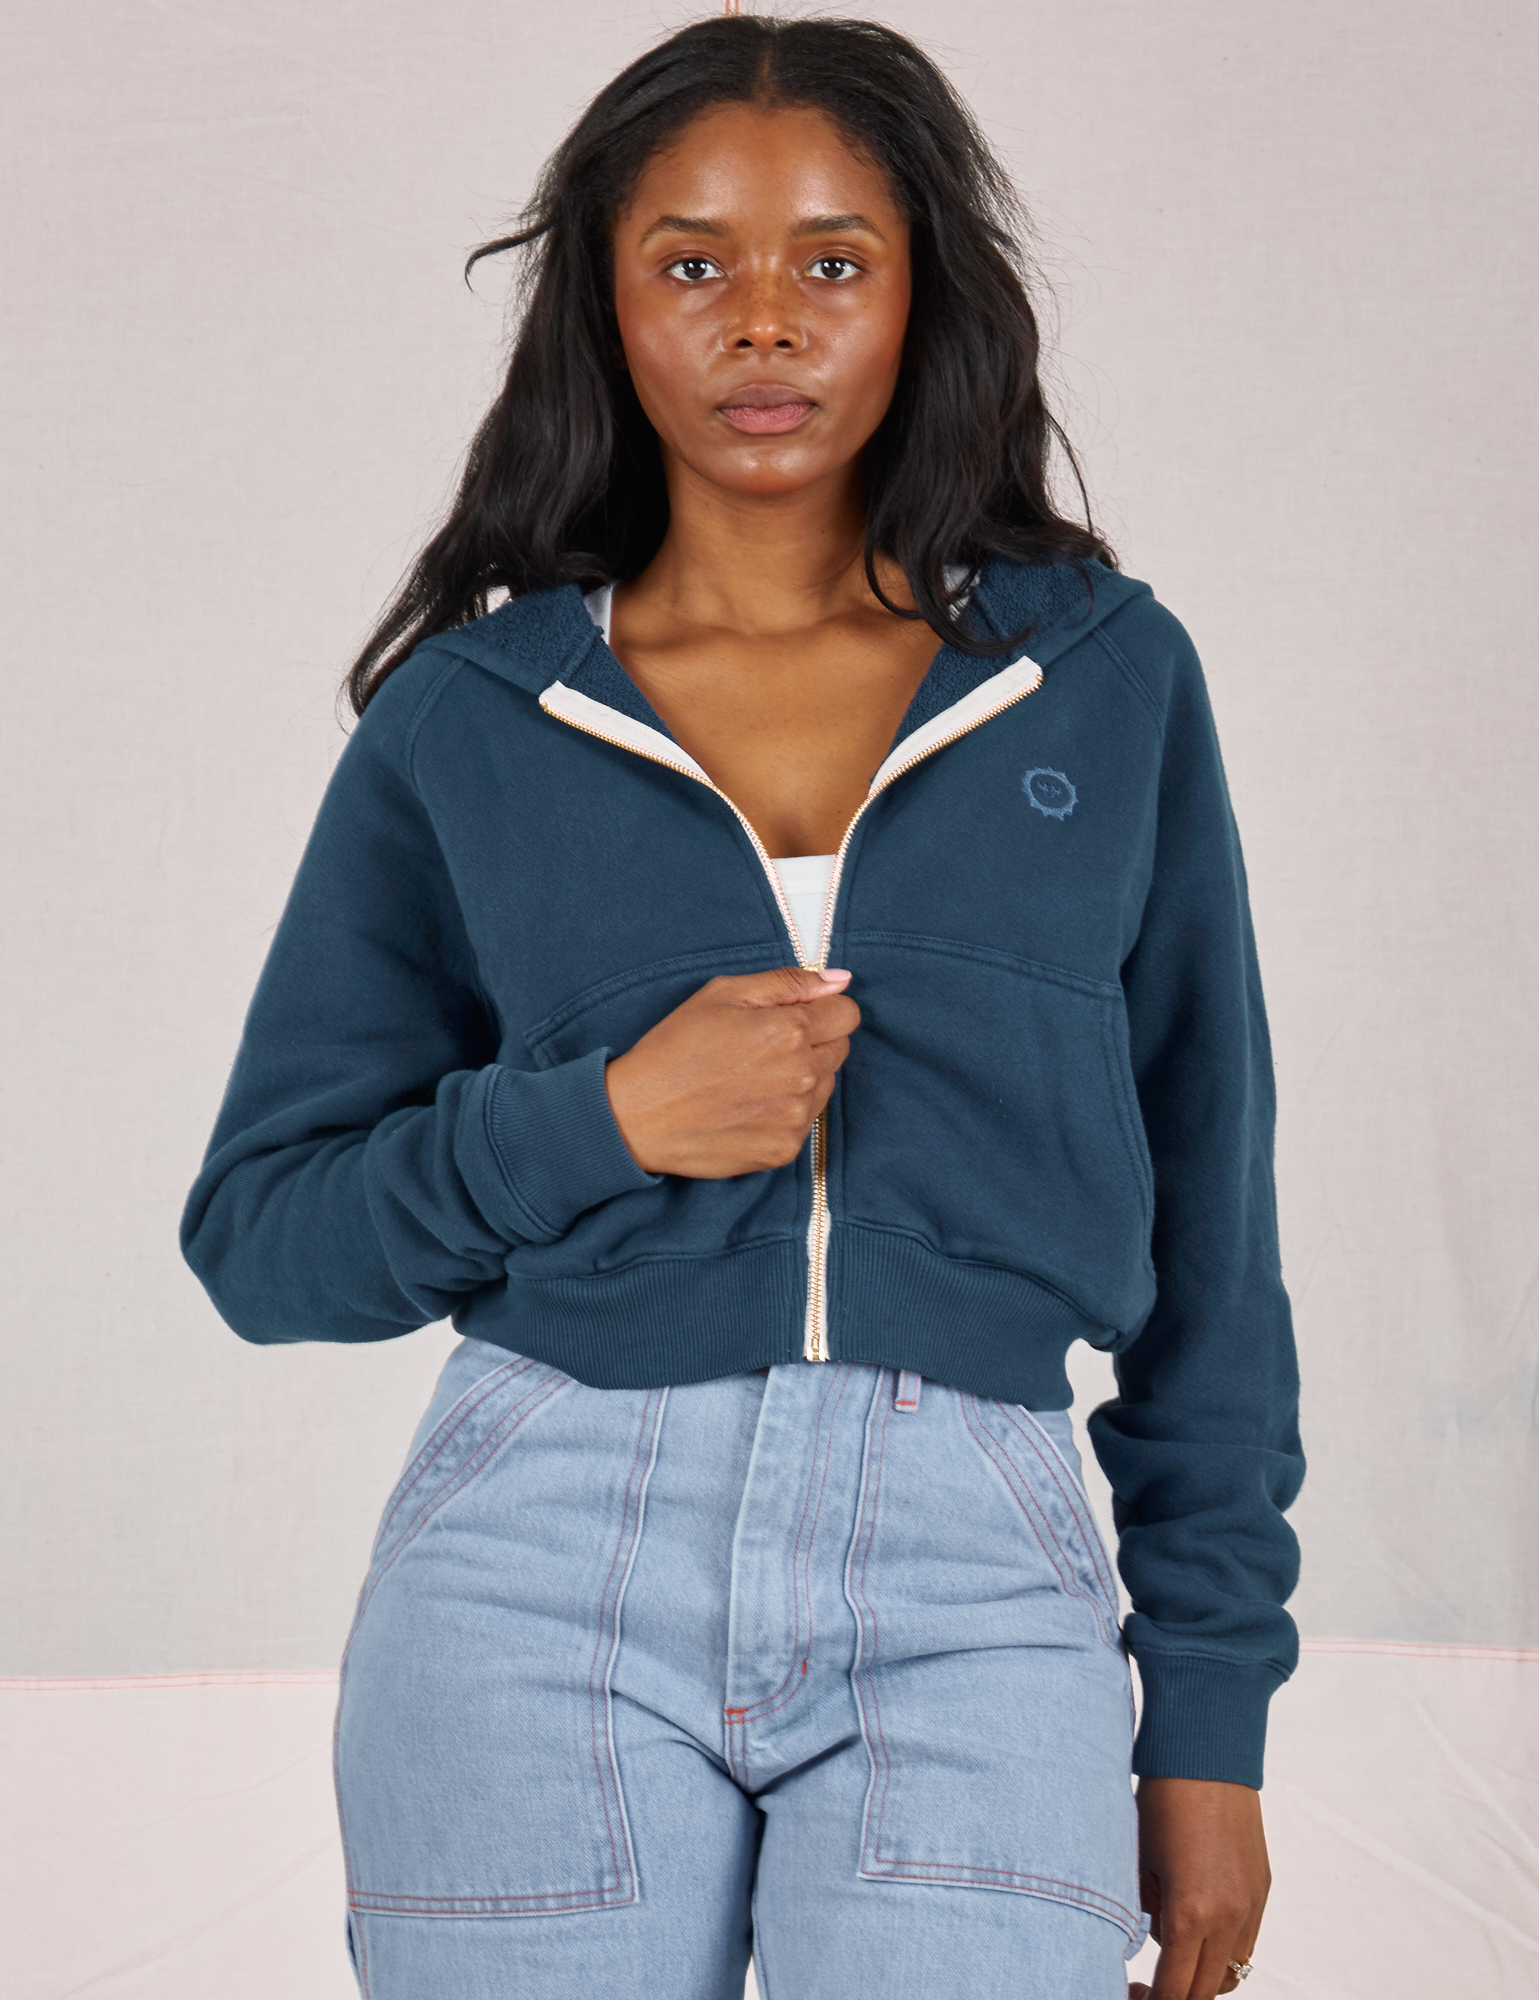 Kandia is wearing Cropped Zip Hoodie in Lagoon and light wash Carpenter Jeans